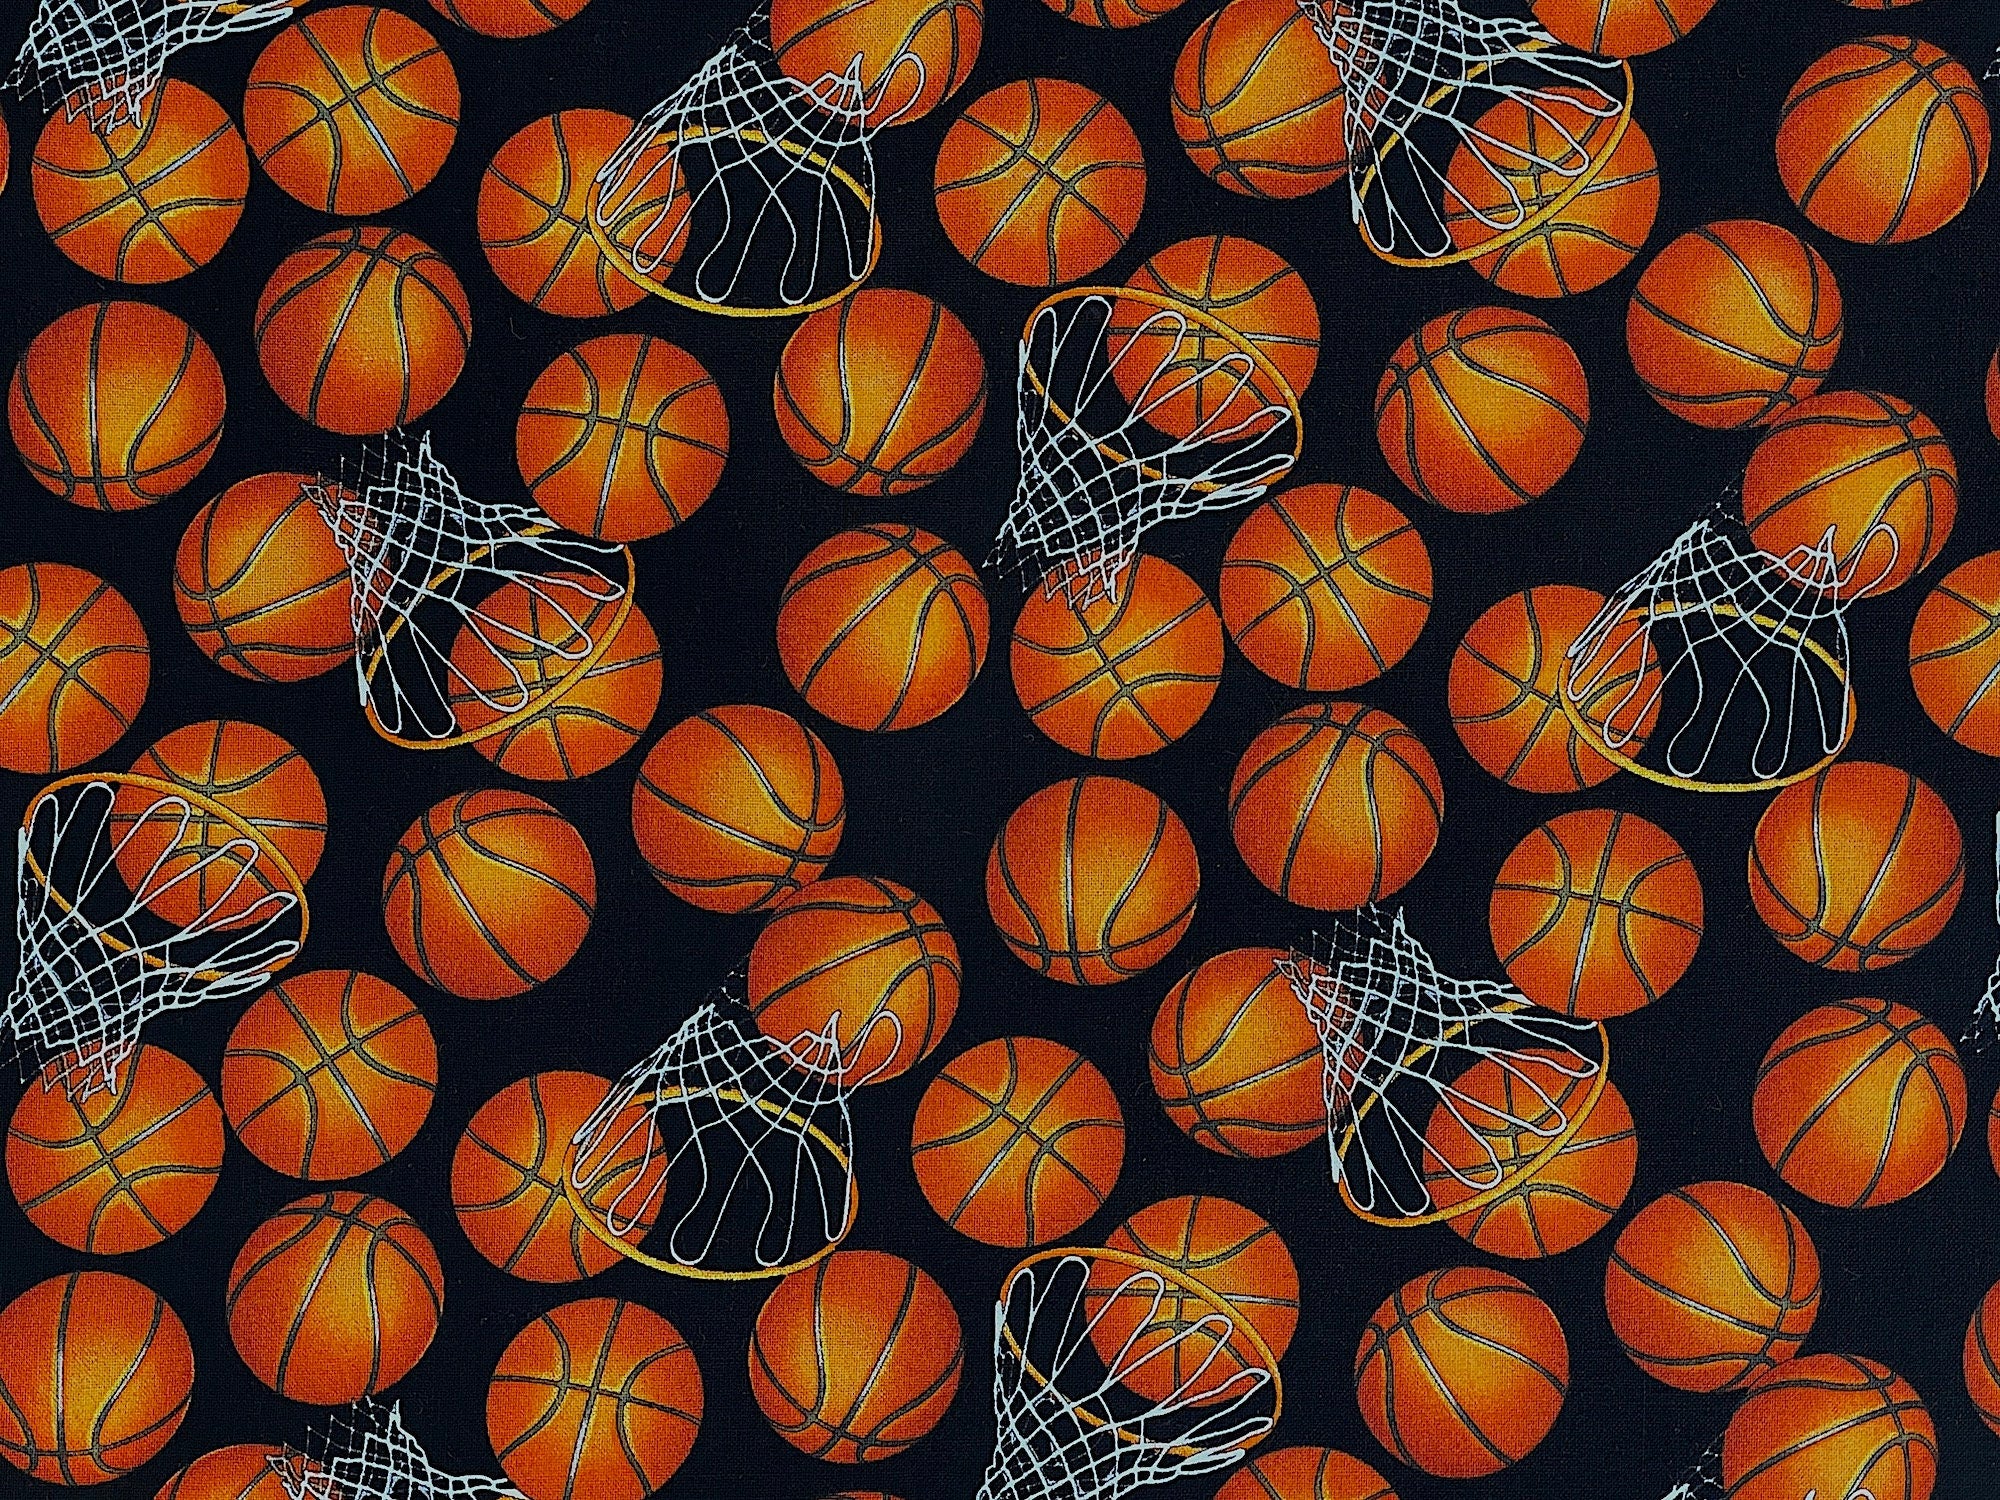 Basketballs and hoops on a black background.